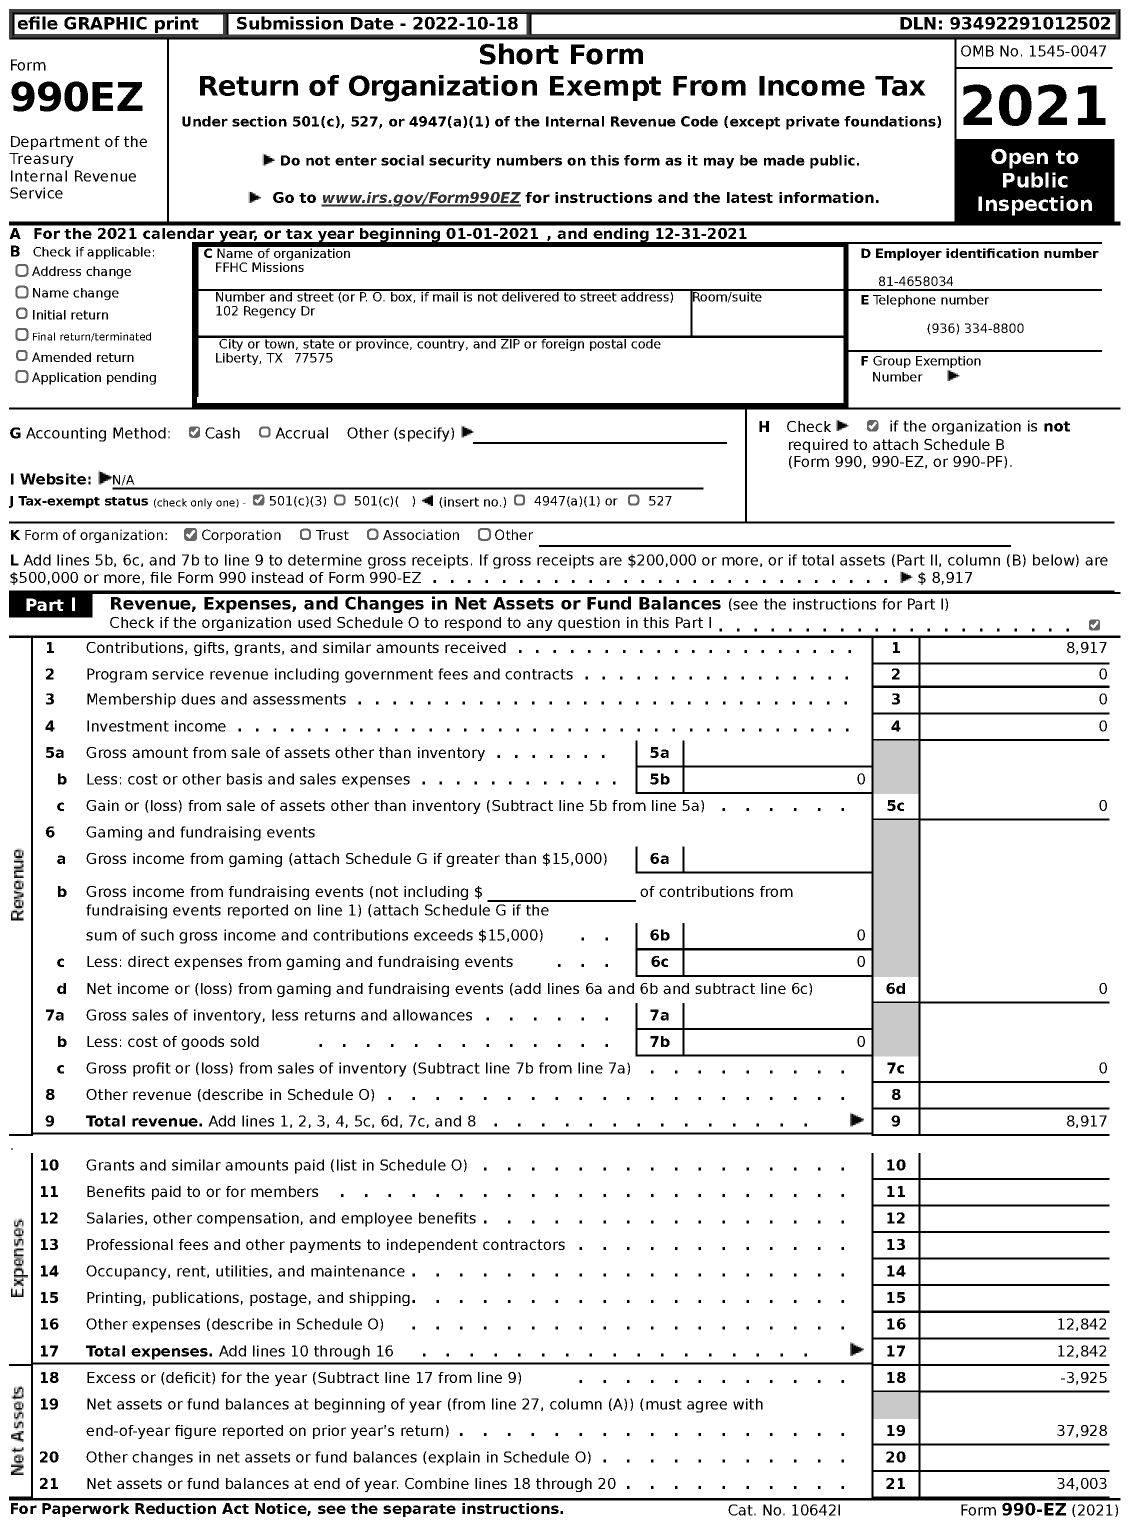 Image of first page of 2021 Form 990EZ for FFHC Missions